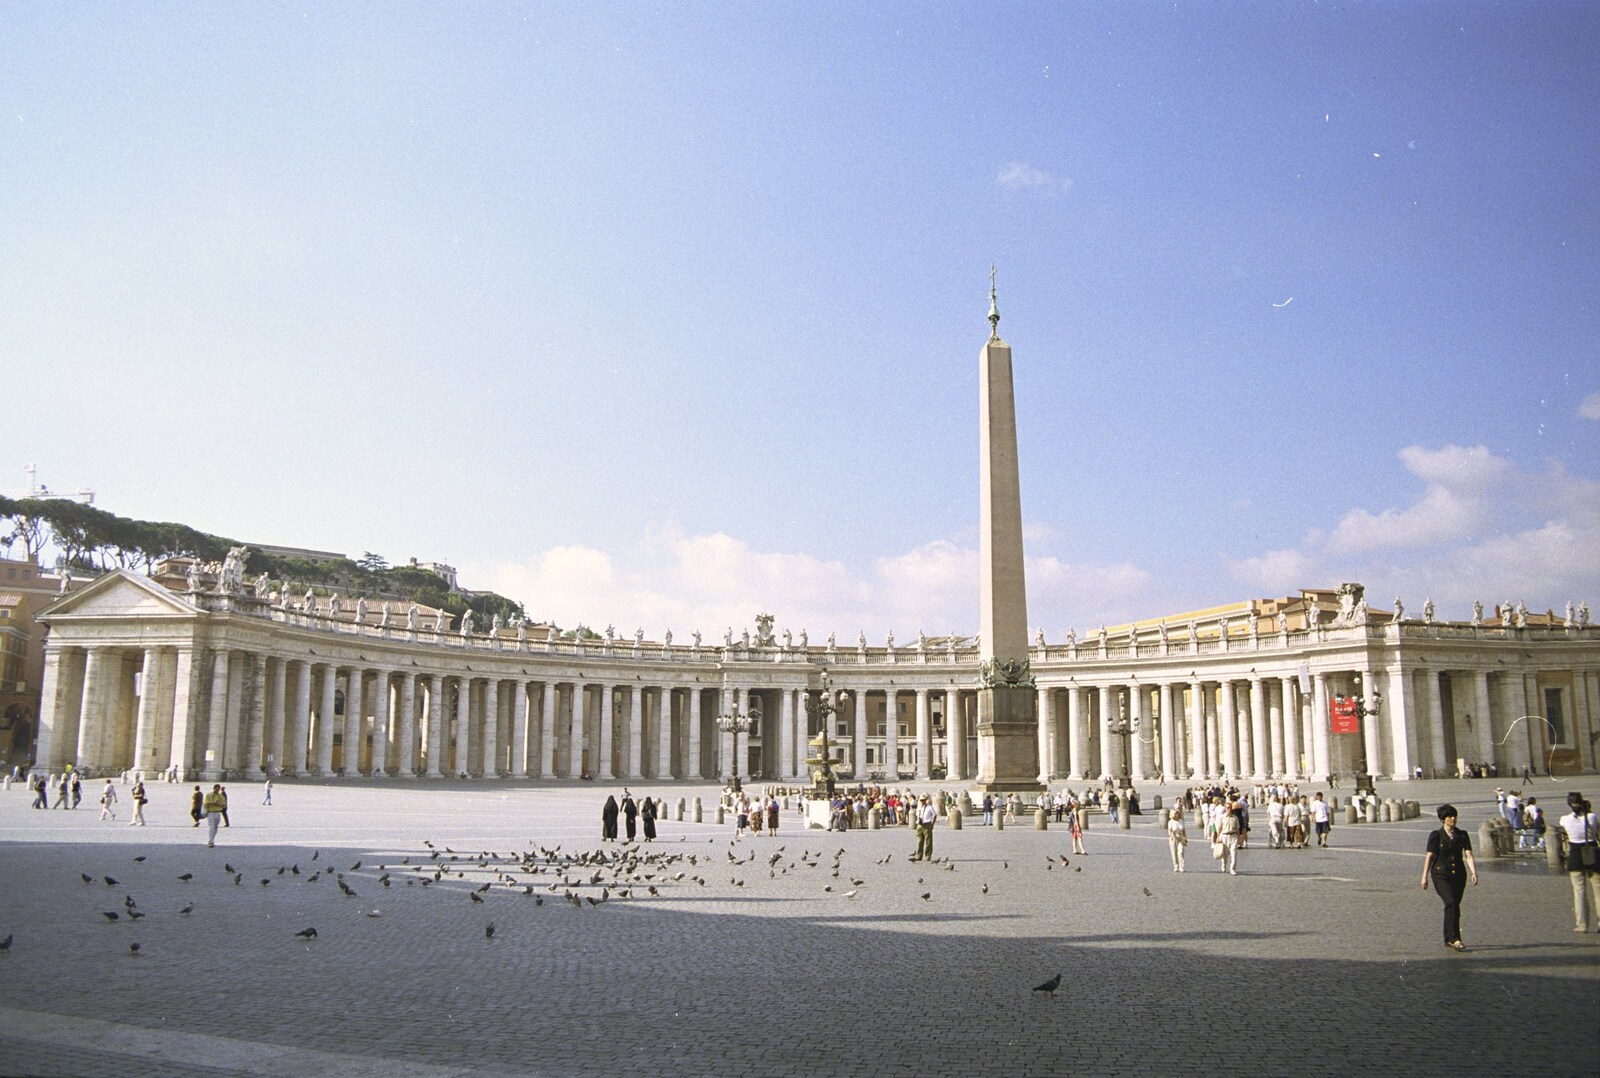 St. Peter's Square from A Working Trip to Rome, Italy - 10th September 1999